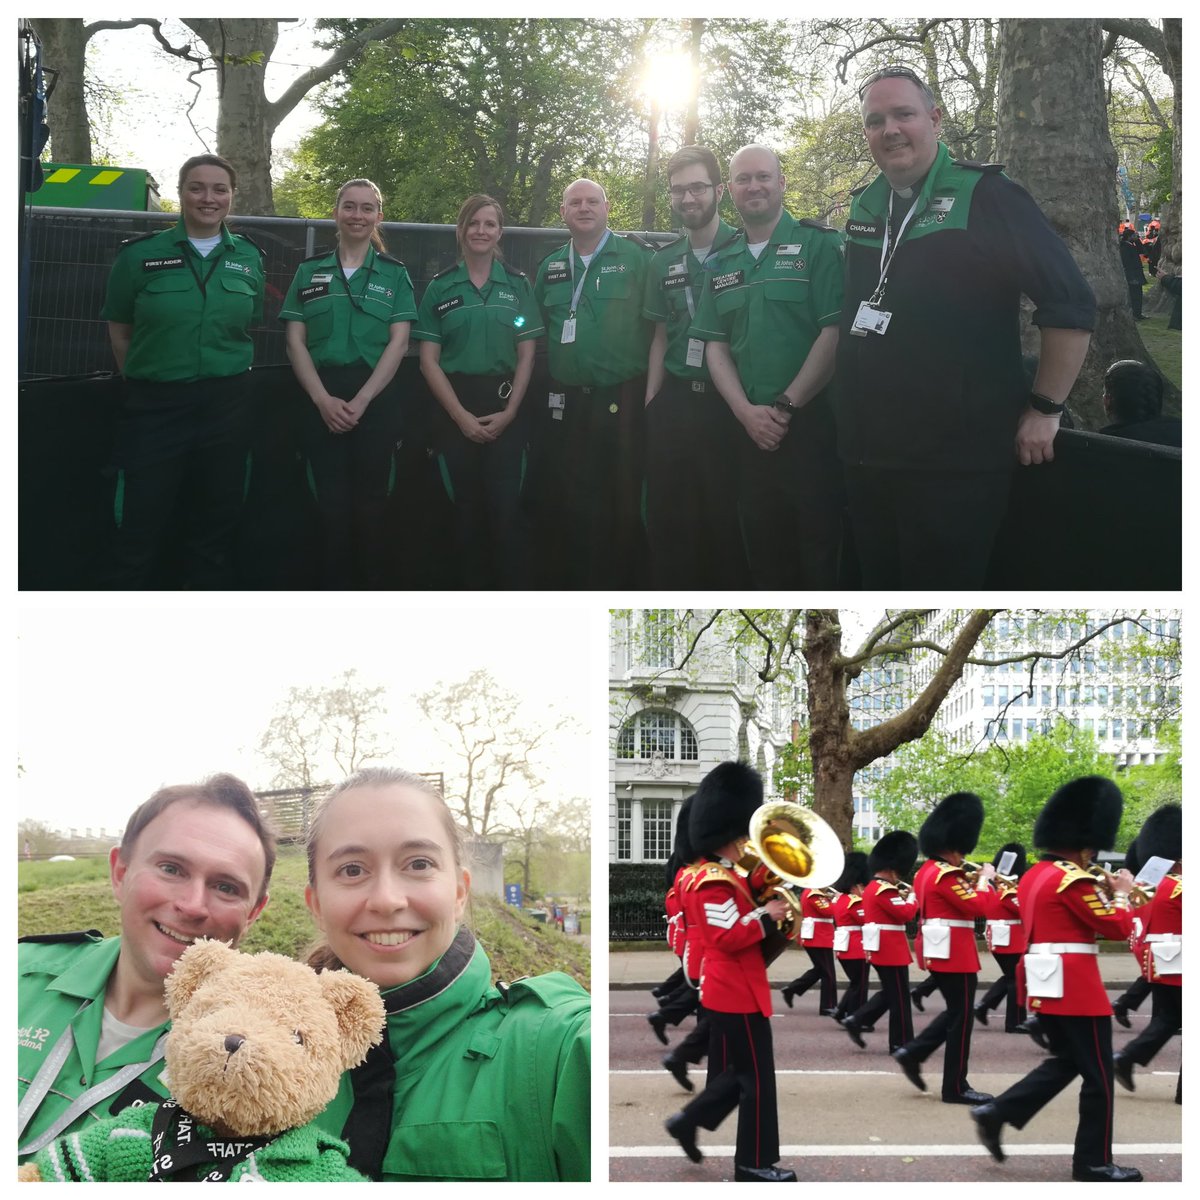 What an incredibly rewarding experience...we provided first aid to the public at the coronation event, working with exceptional colleagues and gaining valuable knowledge as well as reconnecting with friends💚@stjohnambulance @KCLxSJA @SJA_LS_Student  #CoronationDay   #Coronation